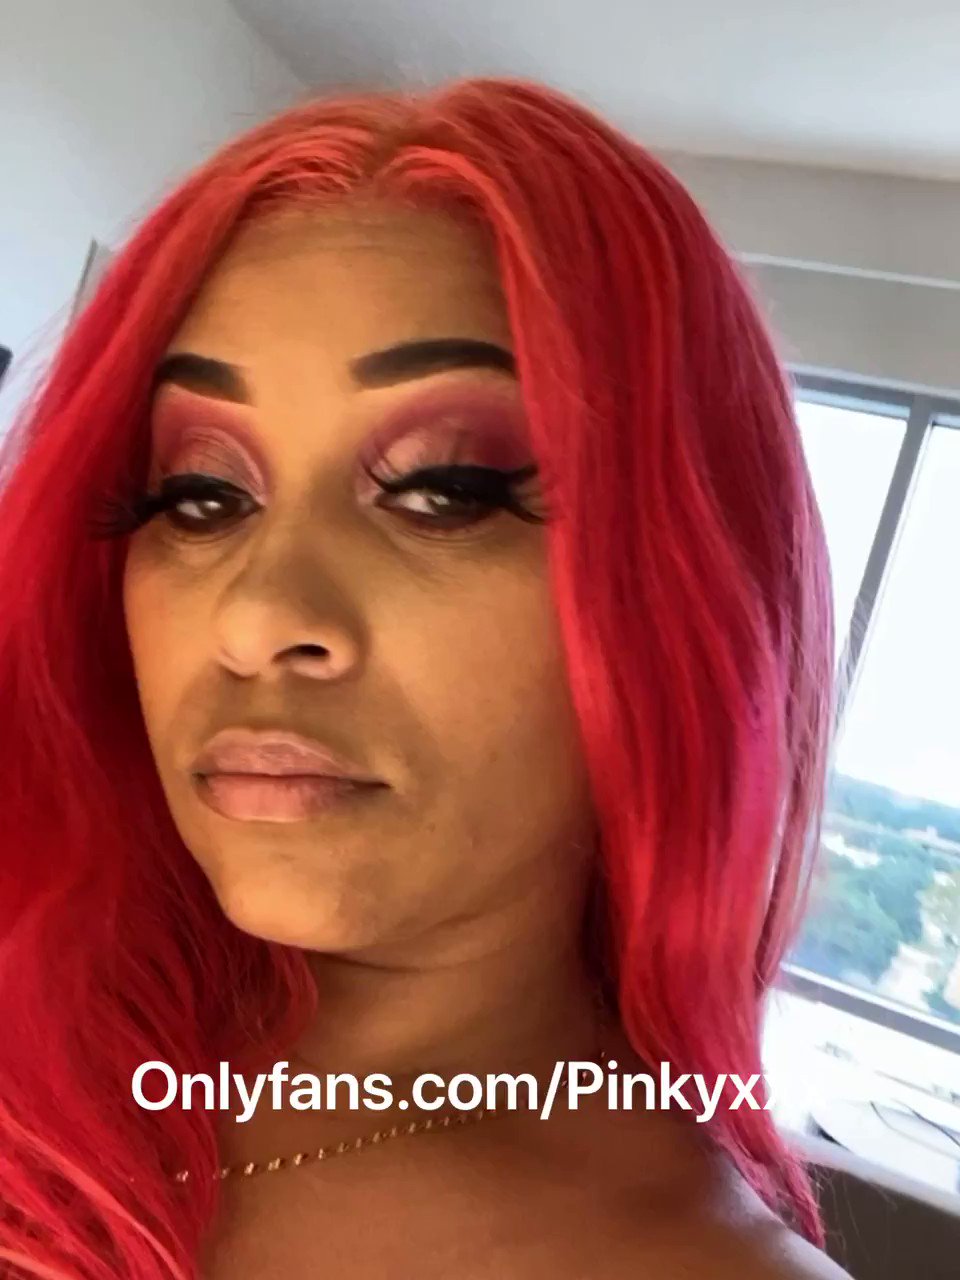 Pinky only fans